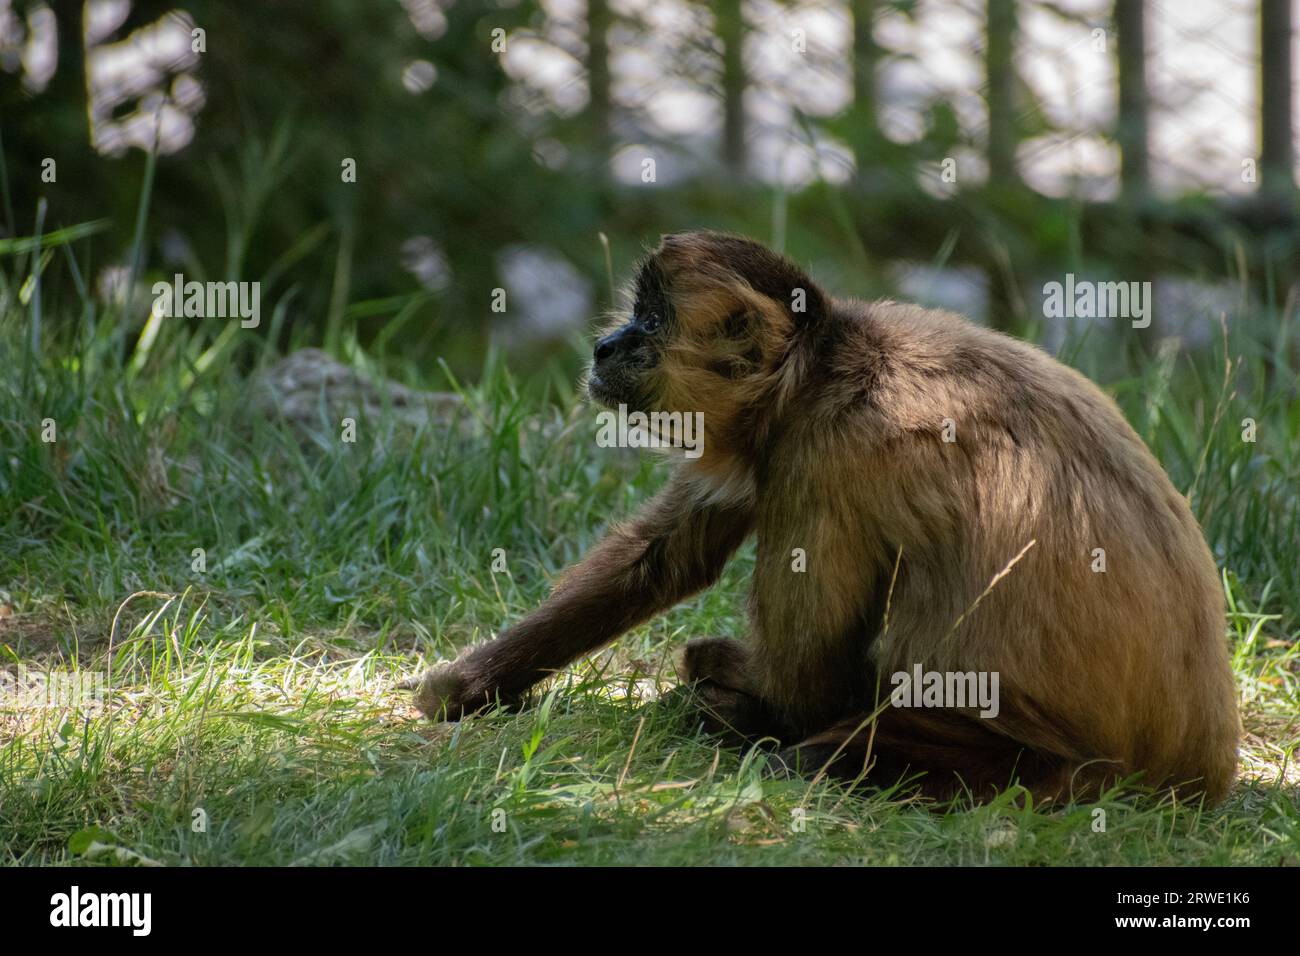 A young Spider Monkey with light brown fur sitting on the grassy field. Stock Photo